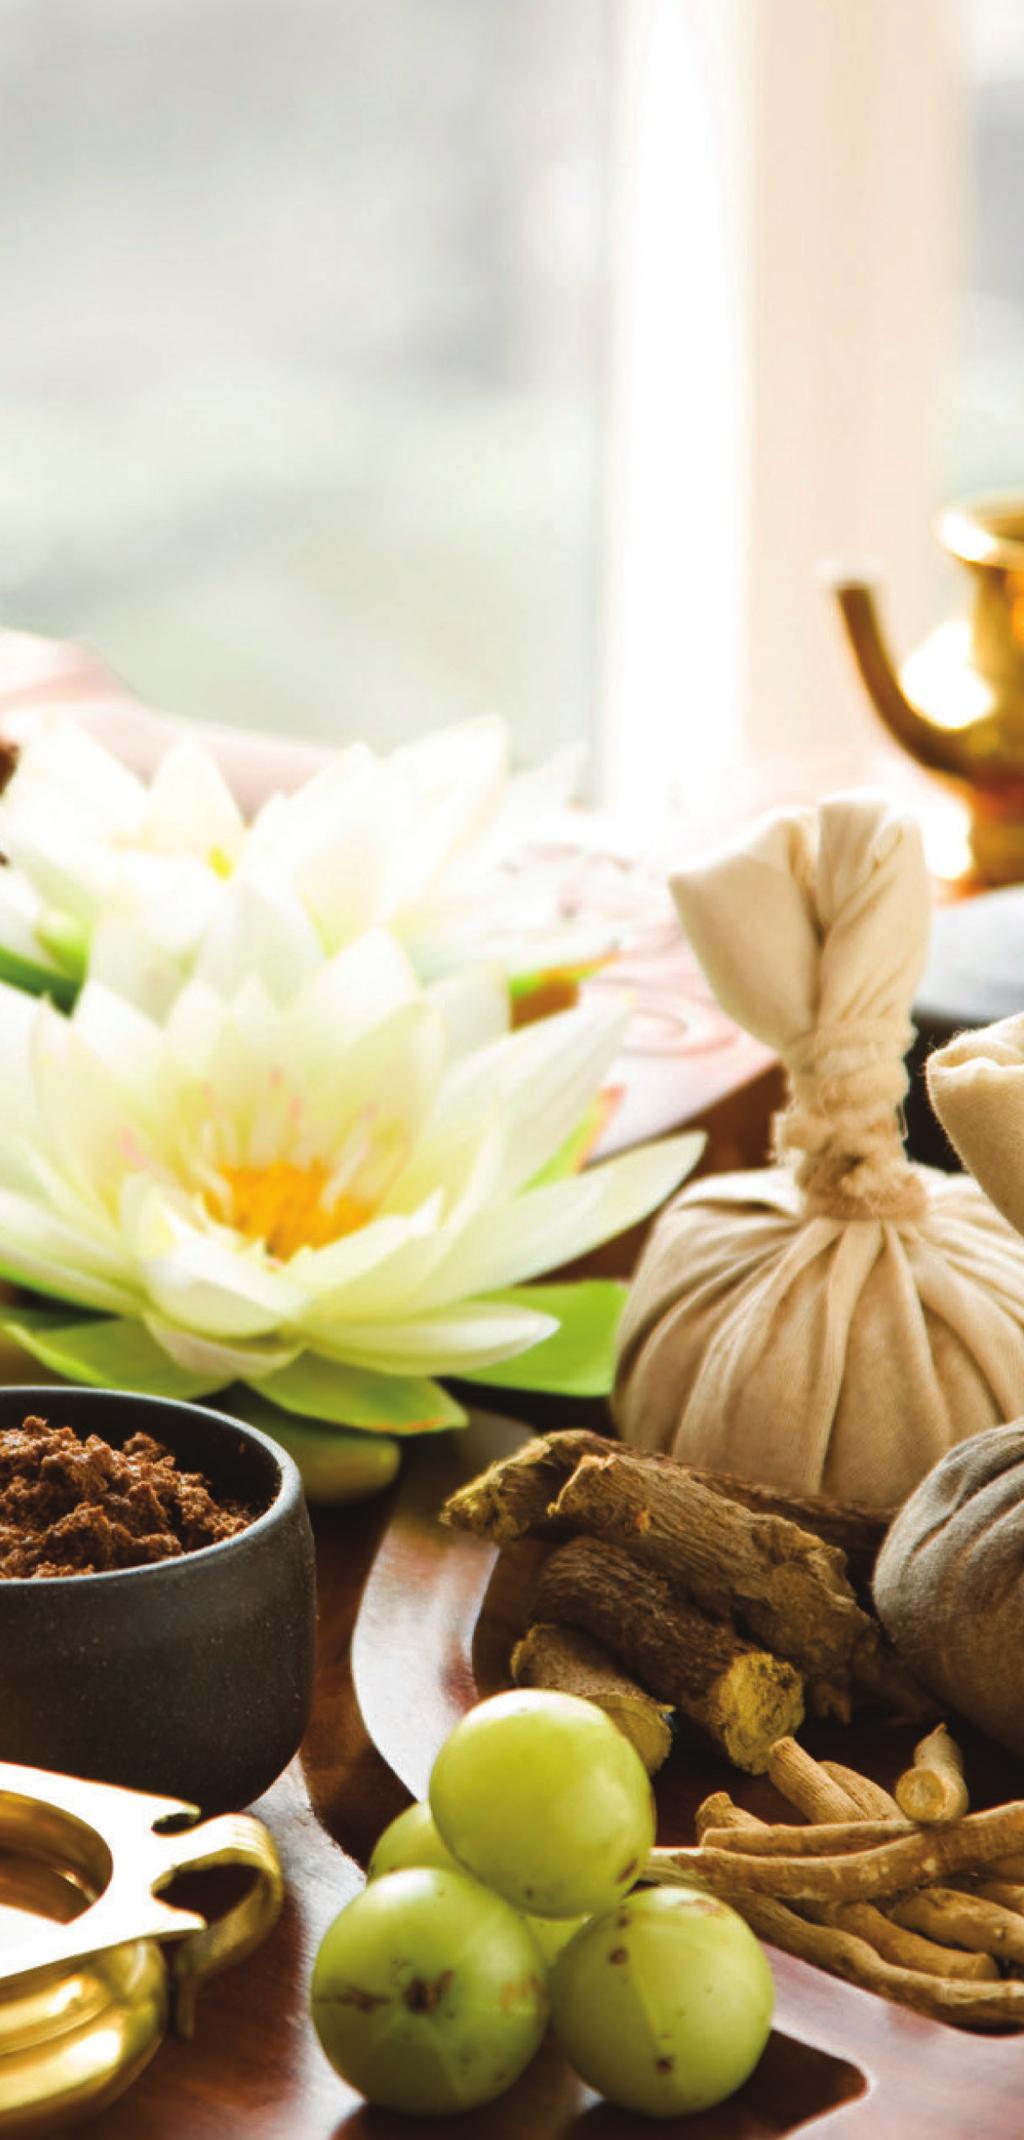 OUR RITUALS ABHYANGA SNANAM 90 MIN AED 525 This treatment starts with a luxurious full-body warm oil massage, followed by the application of rich herbal paste on the whole body.